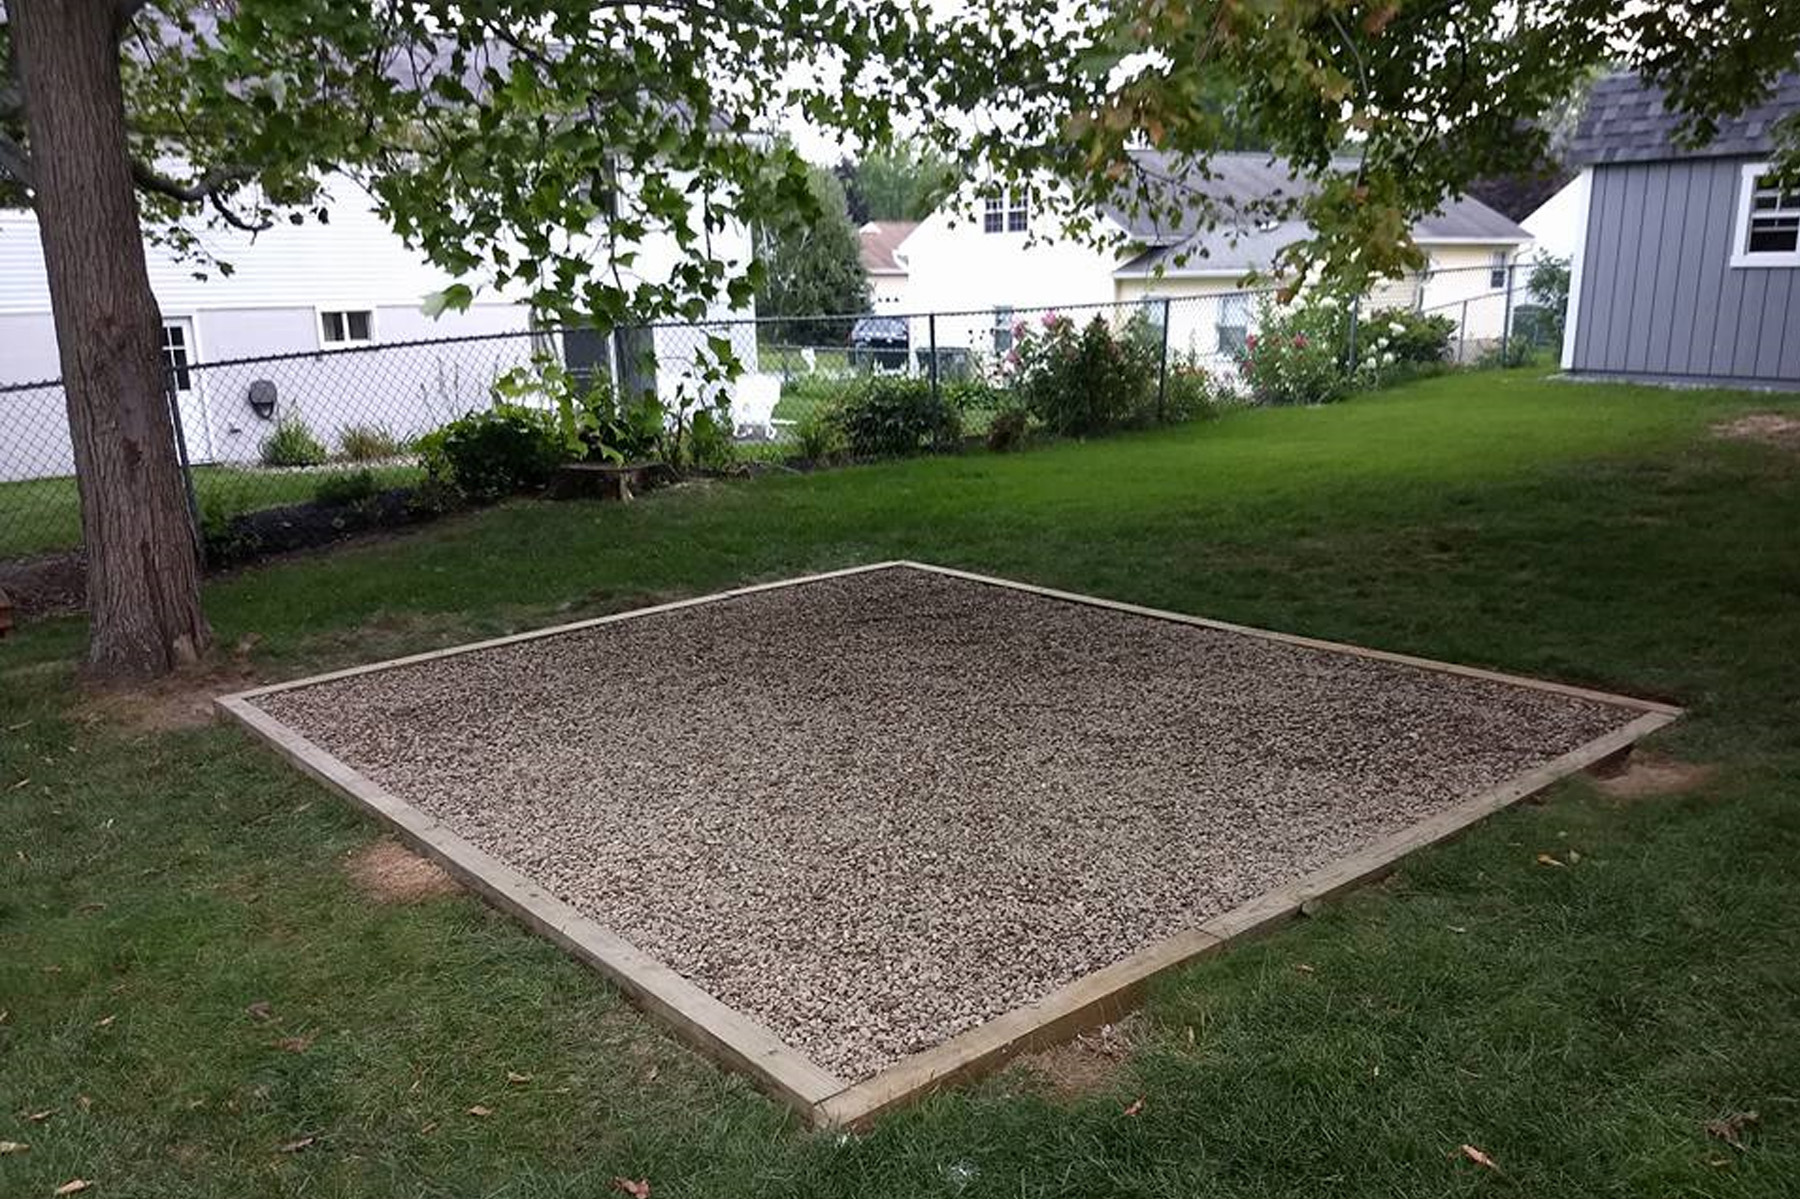 Thumbnail of the completed framed pebble patio